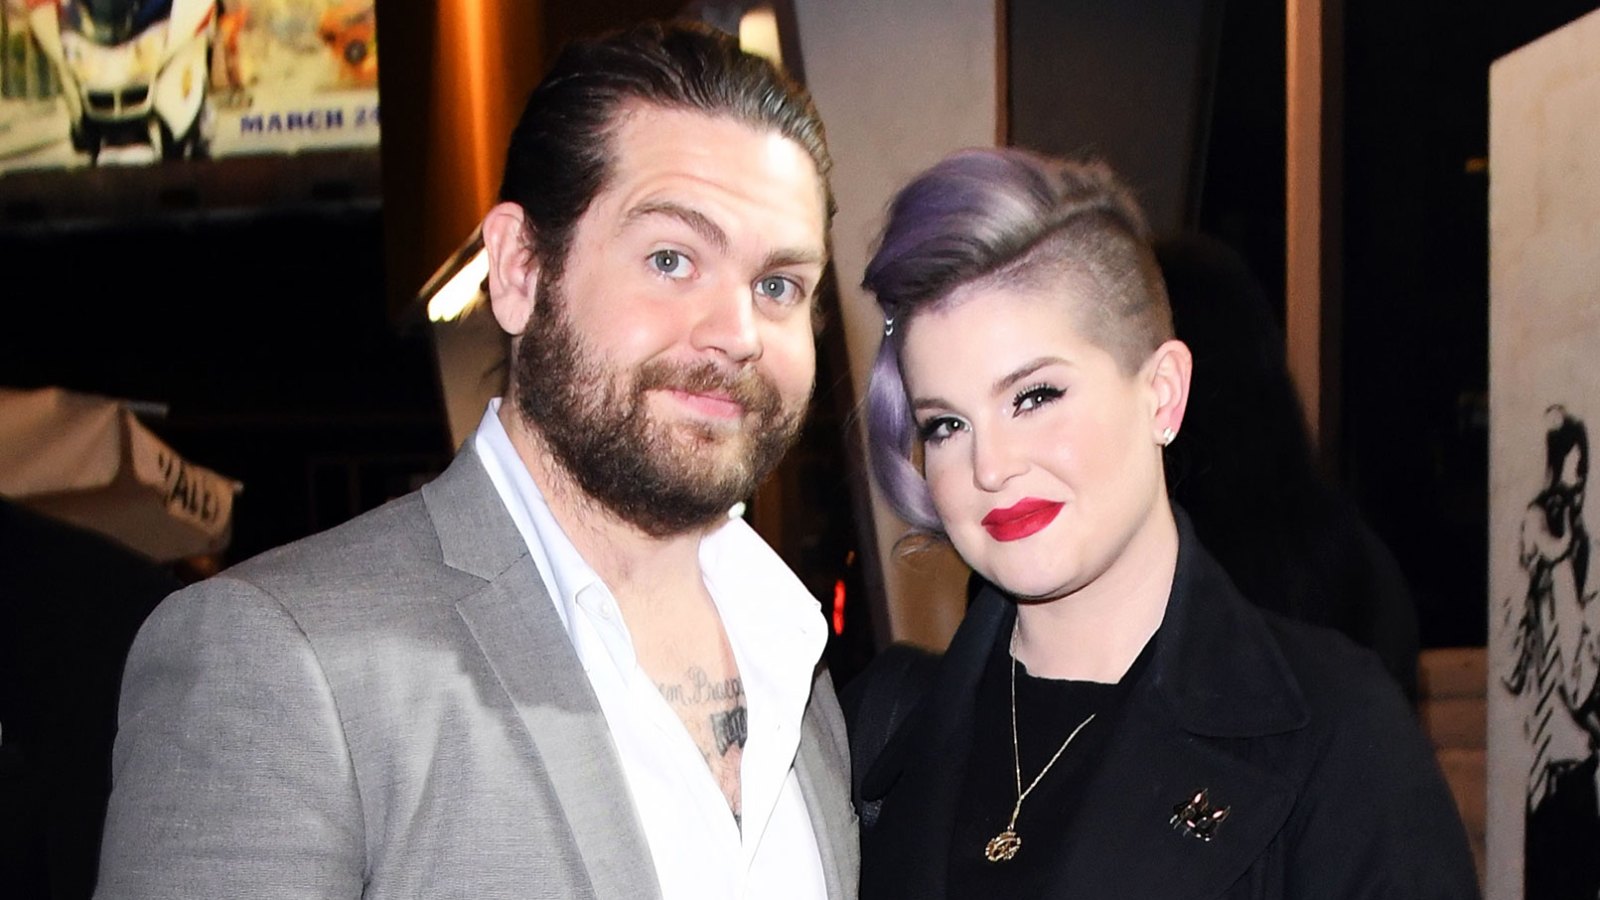 Kelly Osbourne Welcomes New Pet Into Her Family After Brother Jack Osbournes Dog Has Puppies